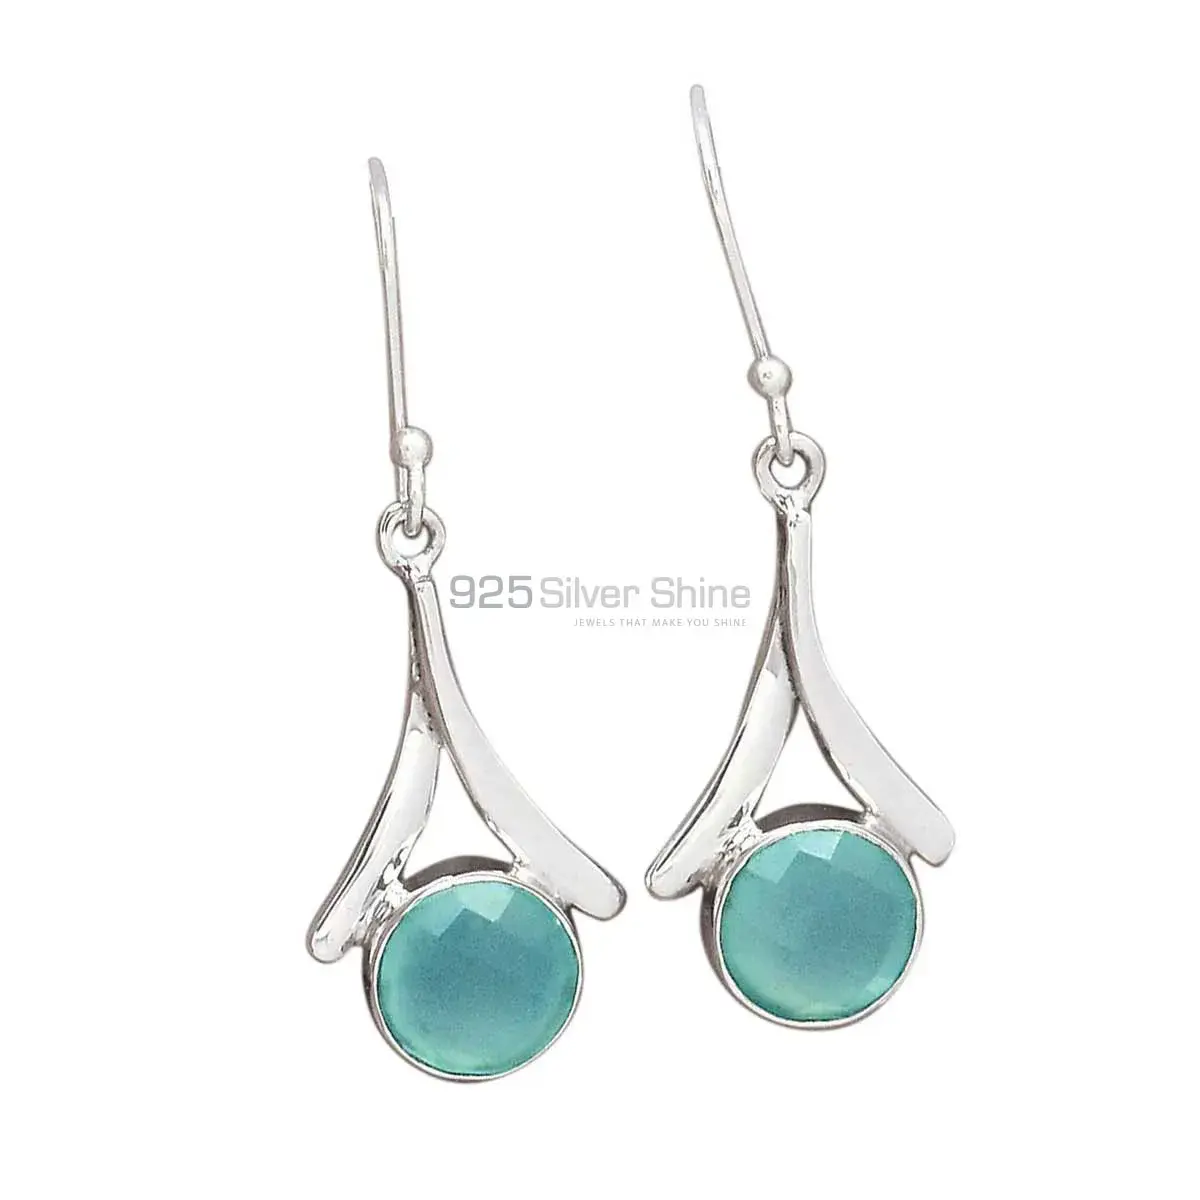 Affordable 925 Sterling Silver Earrings Wholesaler In Chalcedony Gemstone Jewelry 925SE2160